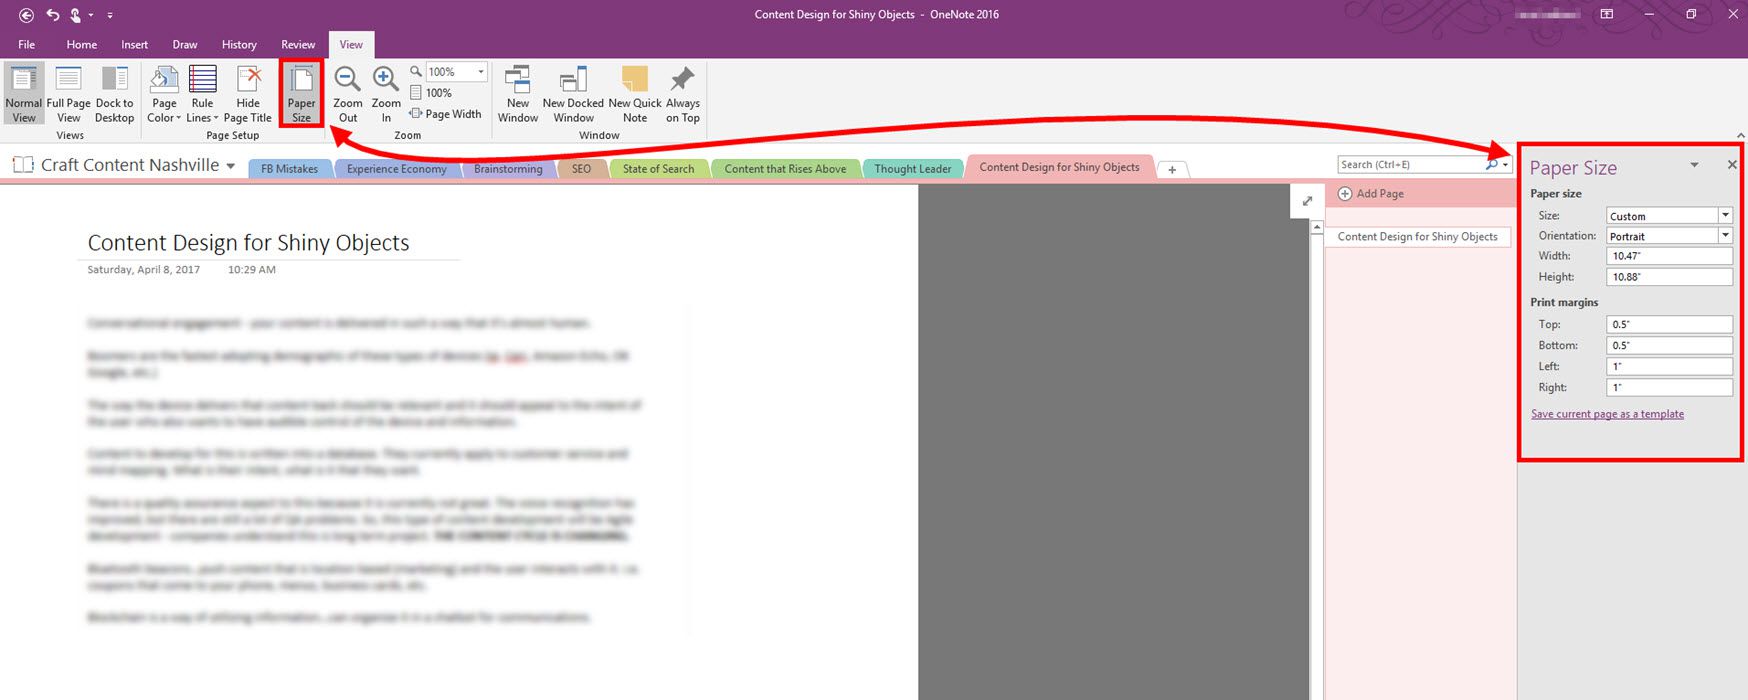 outlines in onenote for mac